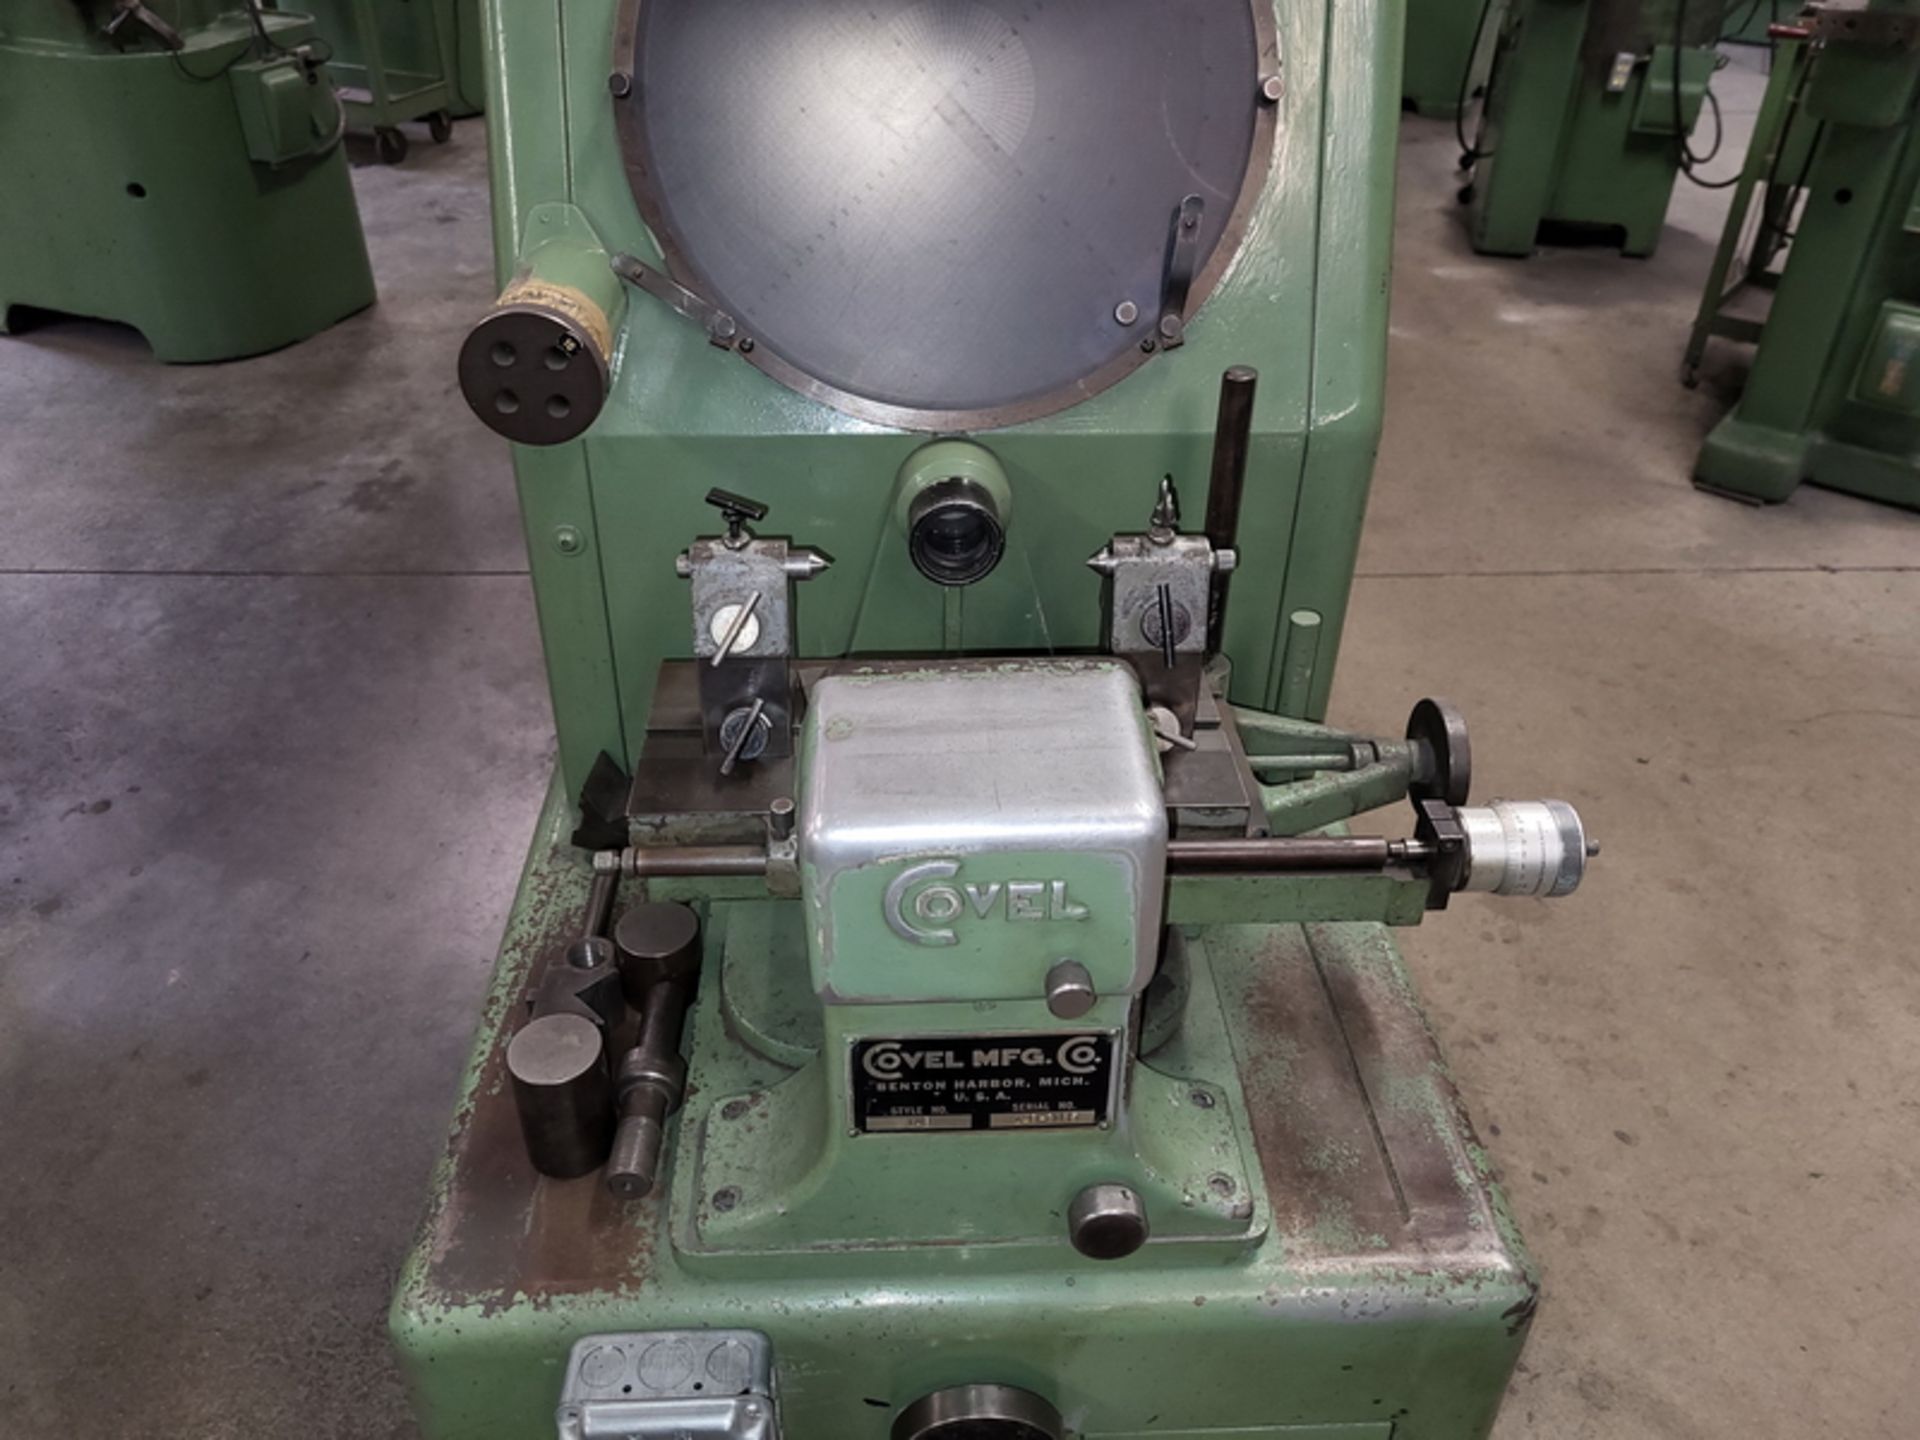 Covel 14 in. Style 14B Optical Comparator & Measuring Machine, S/N: 14B-2035; 13 in. x 6 in. Work - Image 2 of 3